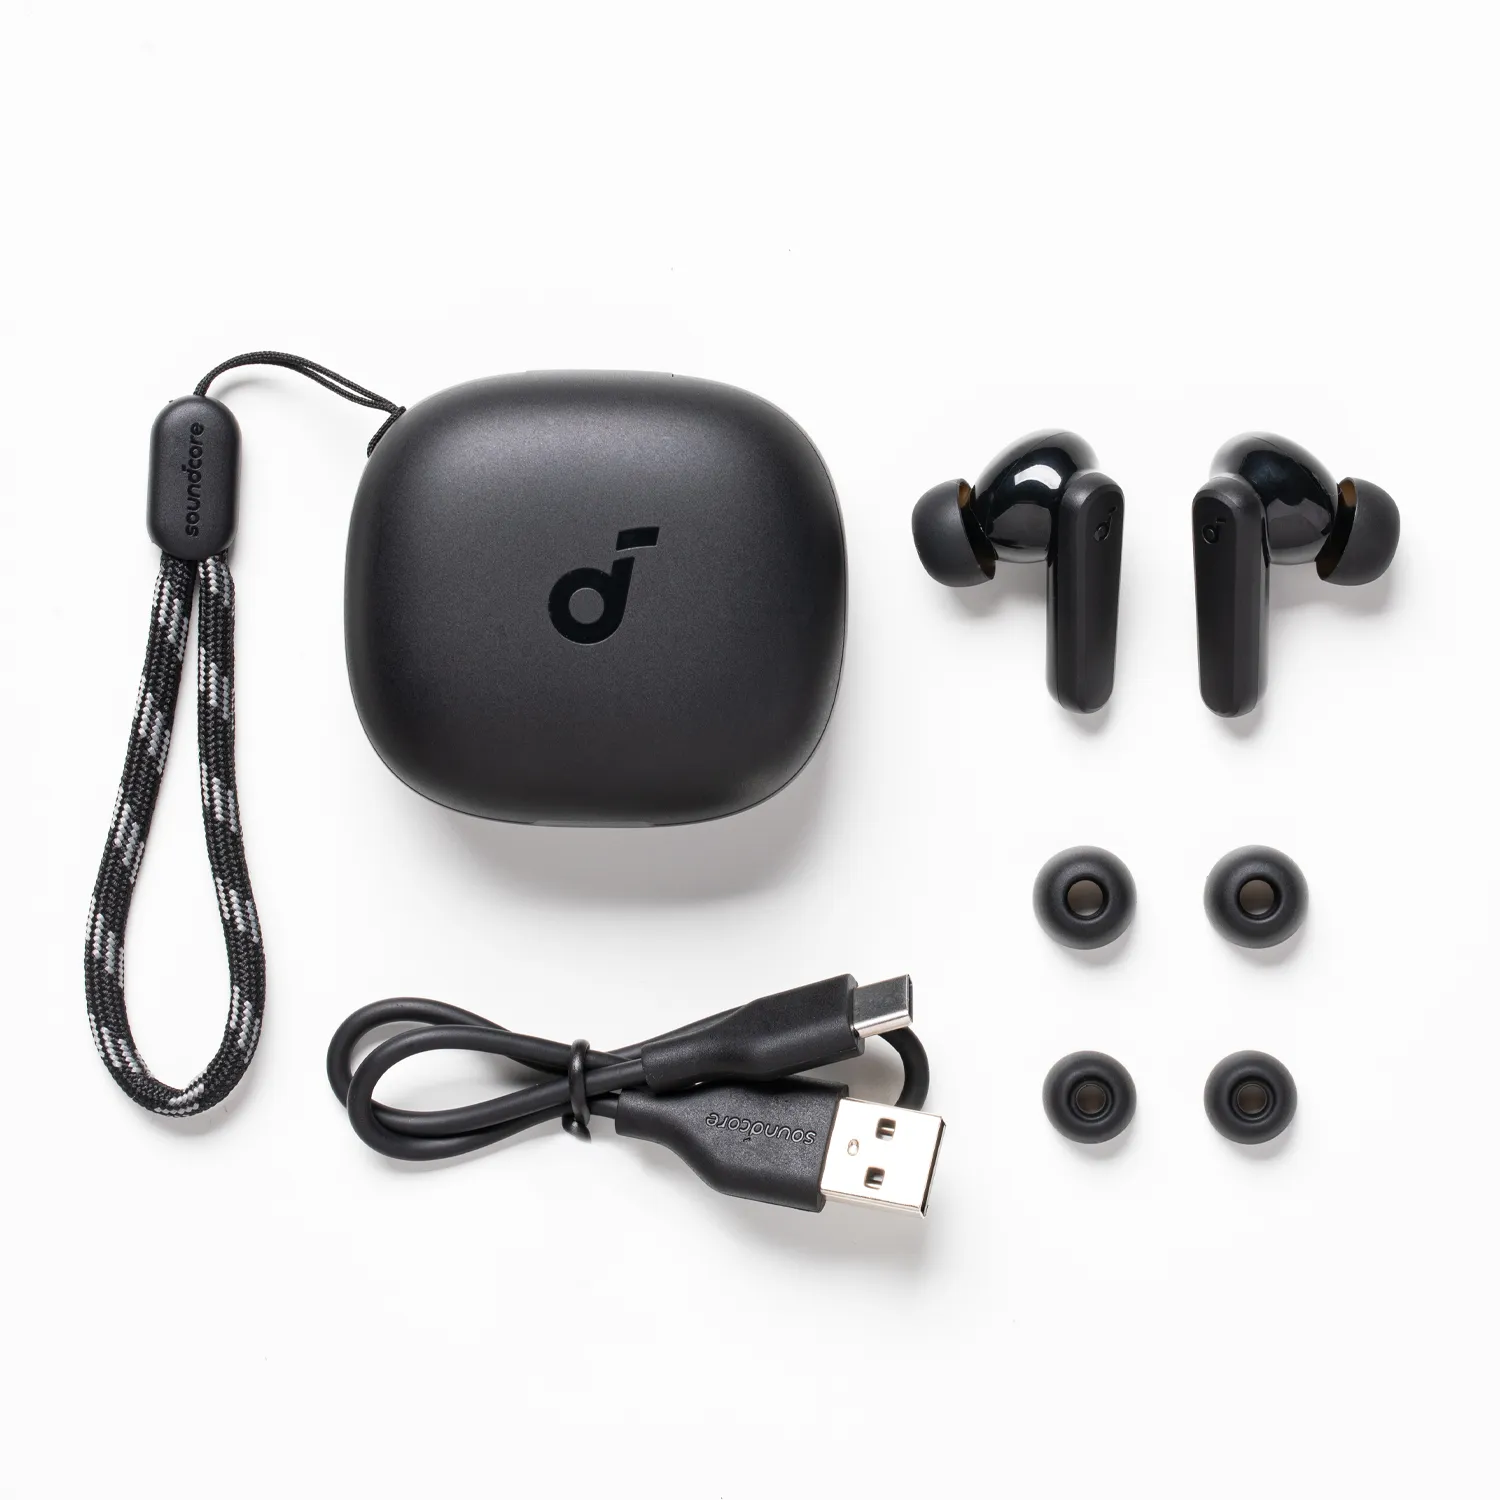 Buy Anker Soundcore R50i Earbuds 20 Hours Playtime Price In Pakistan available on techmac.pk we offer fast home delivery all over nationwide.